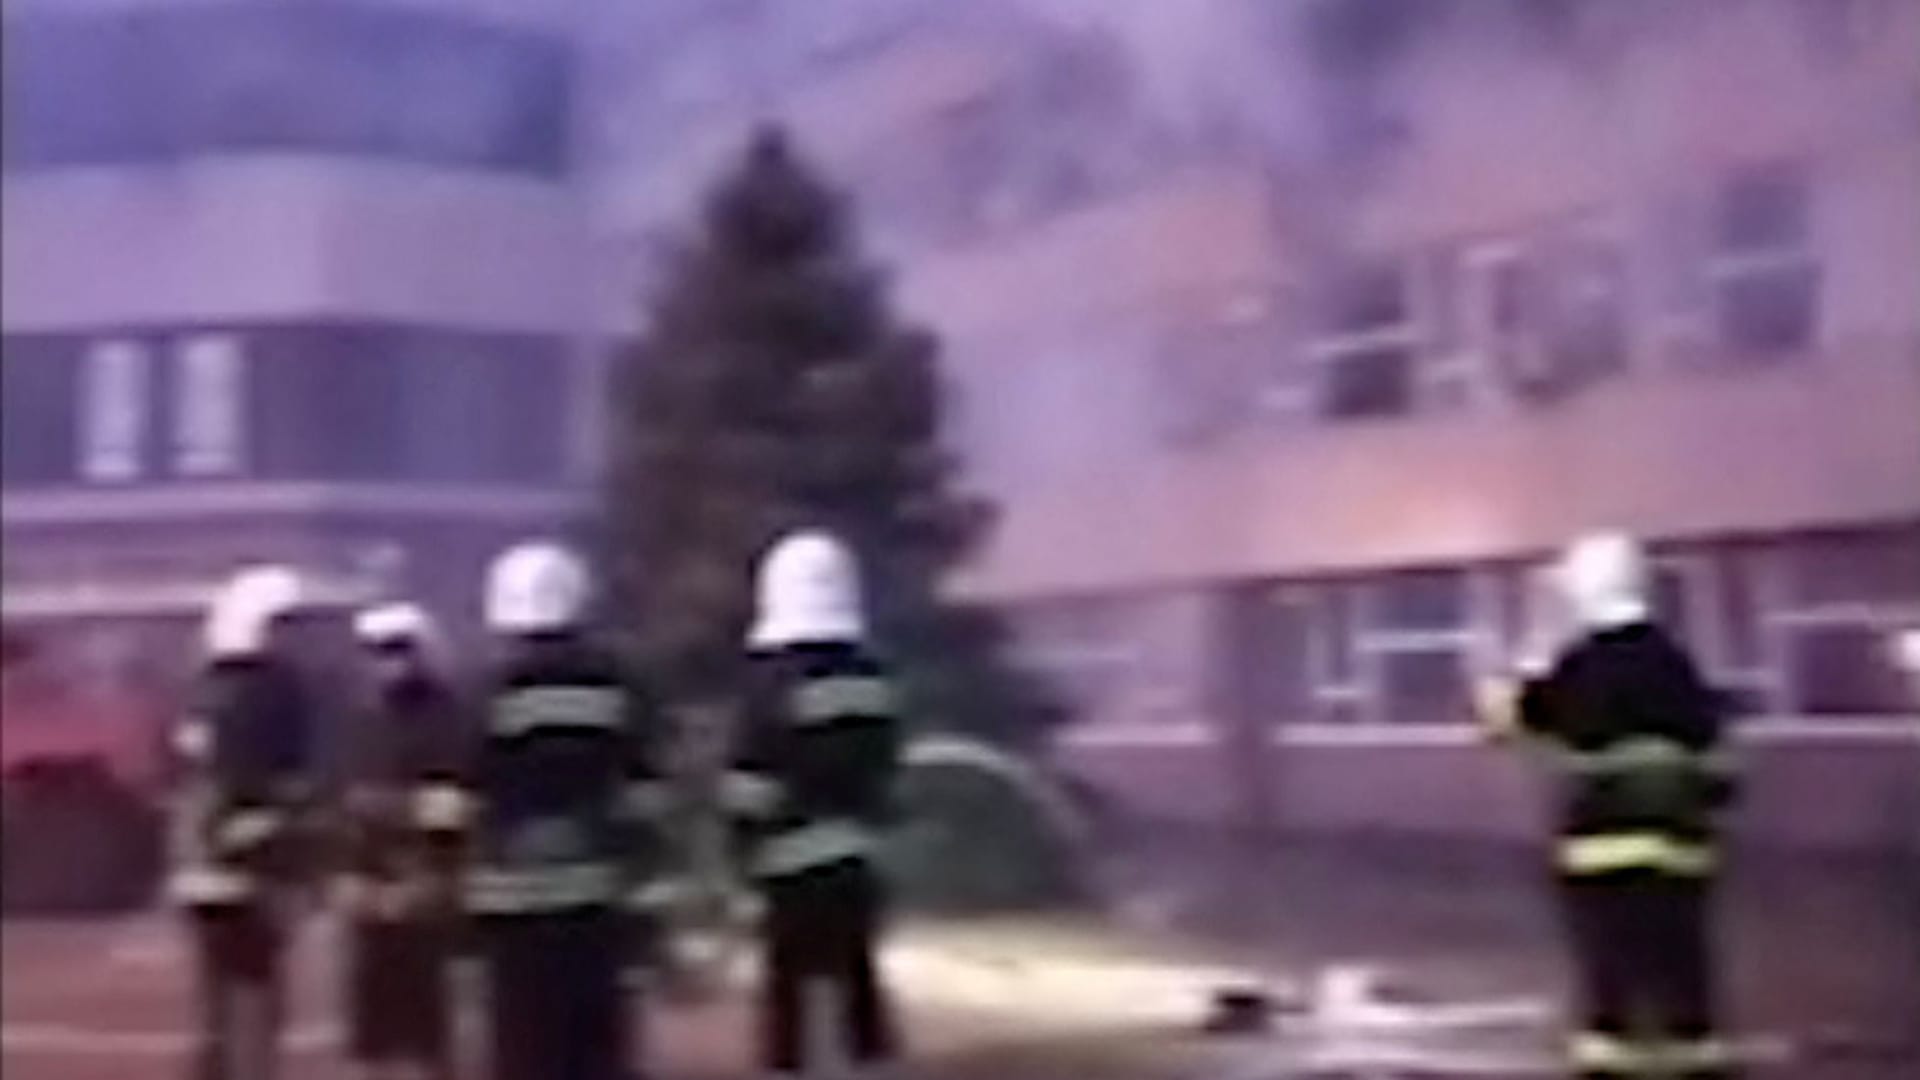 Firefighters work at the entrance to the Zaporizhzhia nuclear power plant, Europe's largest, after attacks by invading Russian forces started a fire at a training area, in Enerhodar, Ukraine March 4, 2022 in this still image obtained from video.